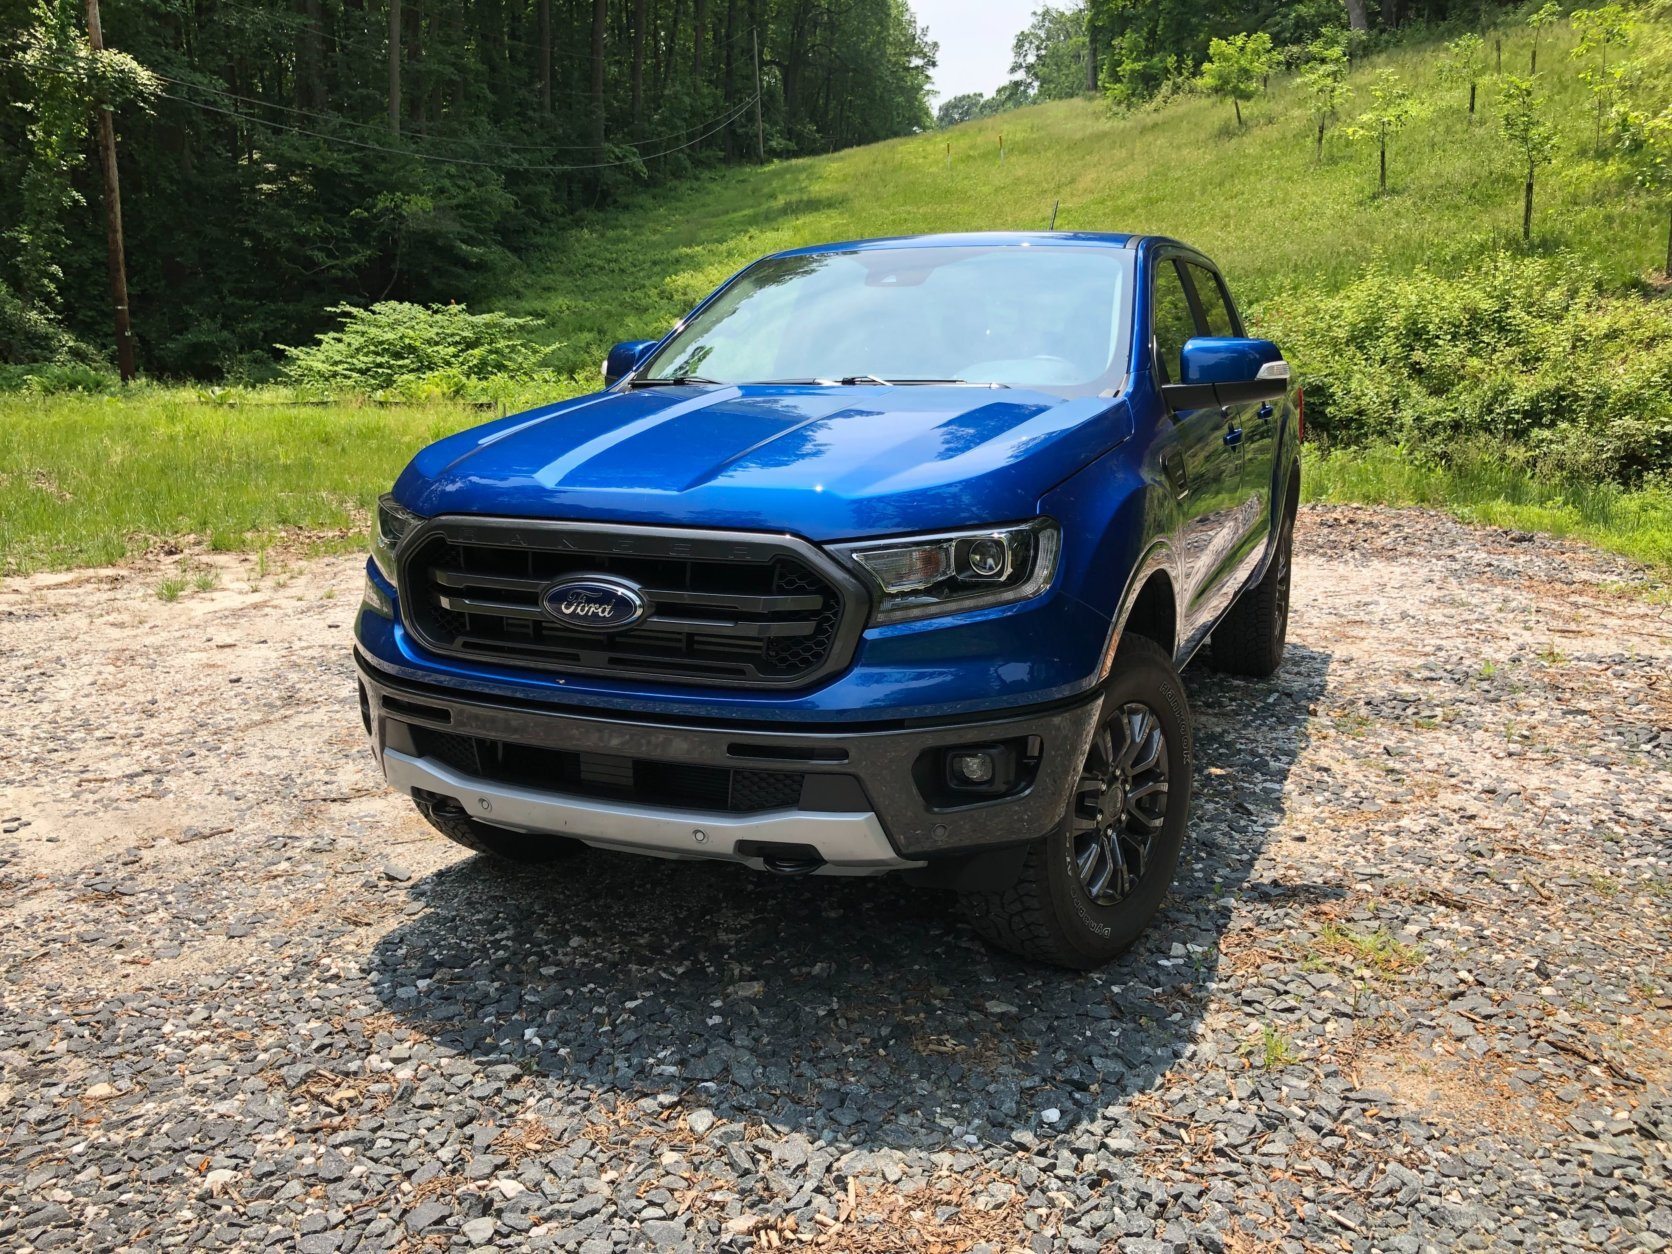 <p>The 2019 small truck market is growing with the new Ford Ranger back in the U.S. The new Ranger is bigger than before; if you remember that last time the Ford Ranger was sold here. It’s a bit of simpler truck now with just two different cab and bed sizes. The new Ranger is more sculpted and less boxy than the original Ranger, less utilitarian also. There is a more sophisticated style with a sculpted body, flared fenders and small vents on the front fenders.</p>
